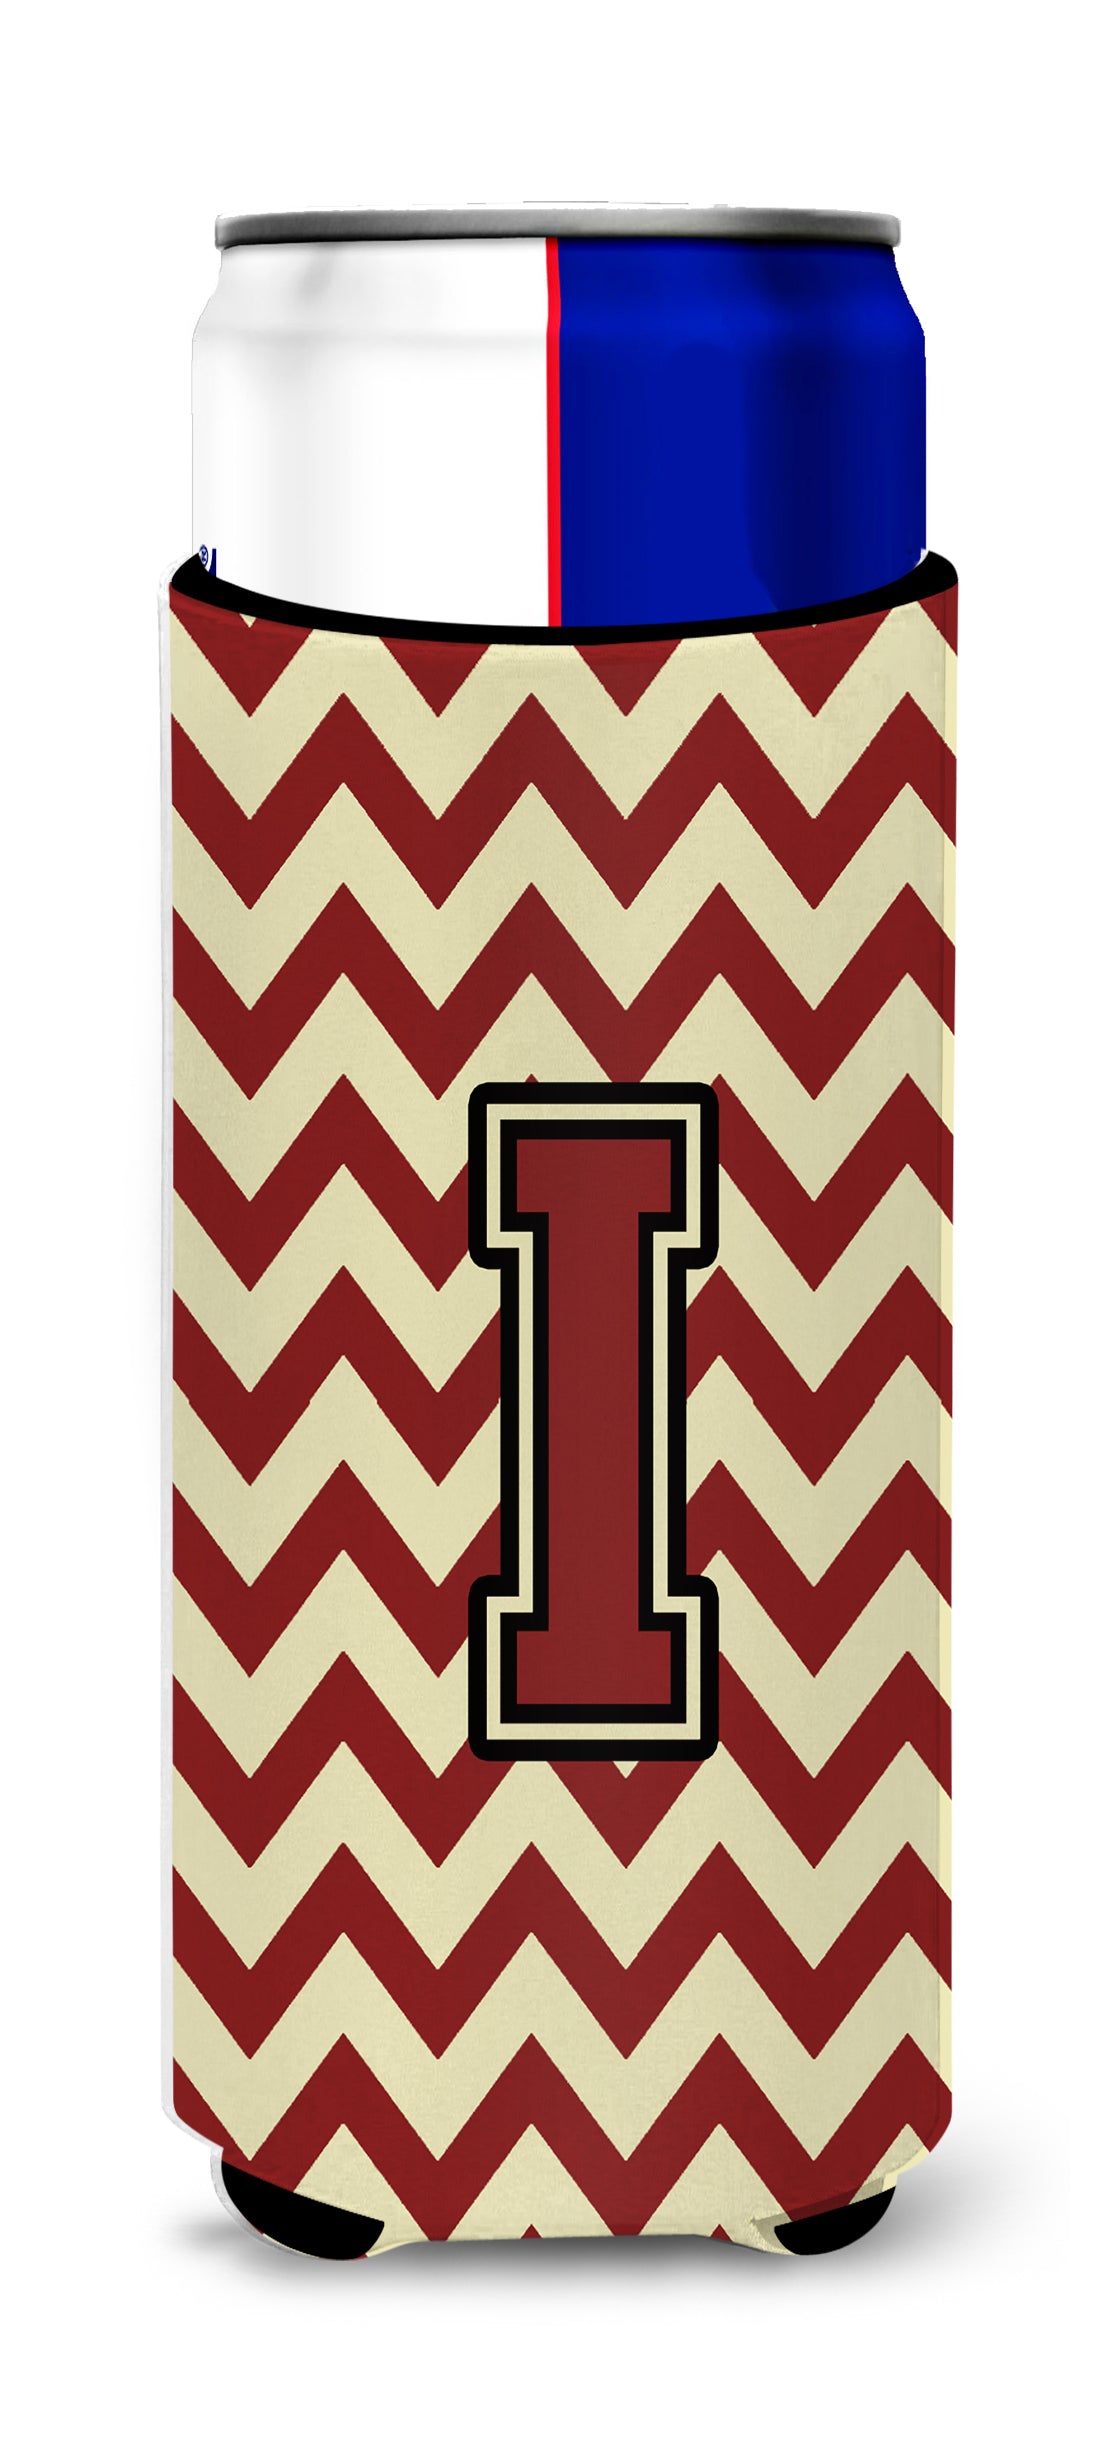 Letter I Chevron Maroon and Gold Ultra Beverage Insulators for slim cans CJ1061-IMUK.